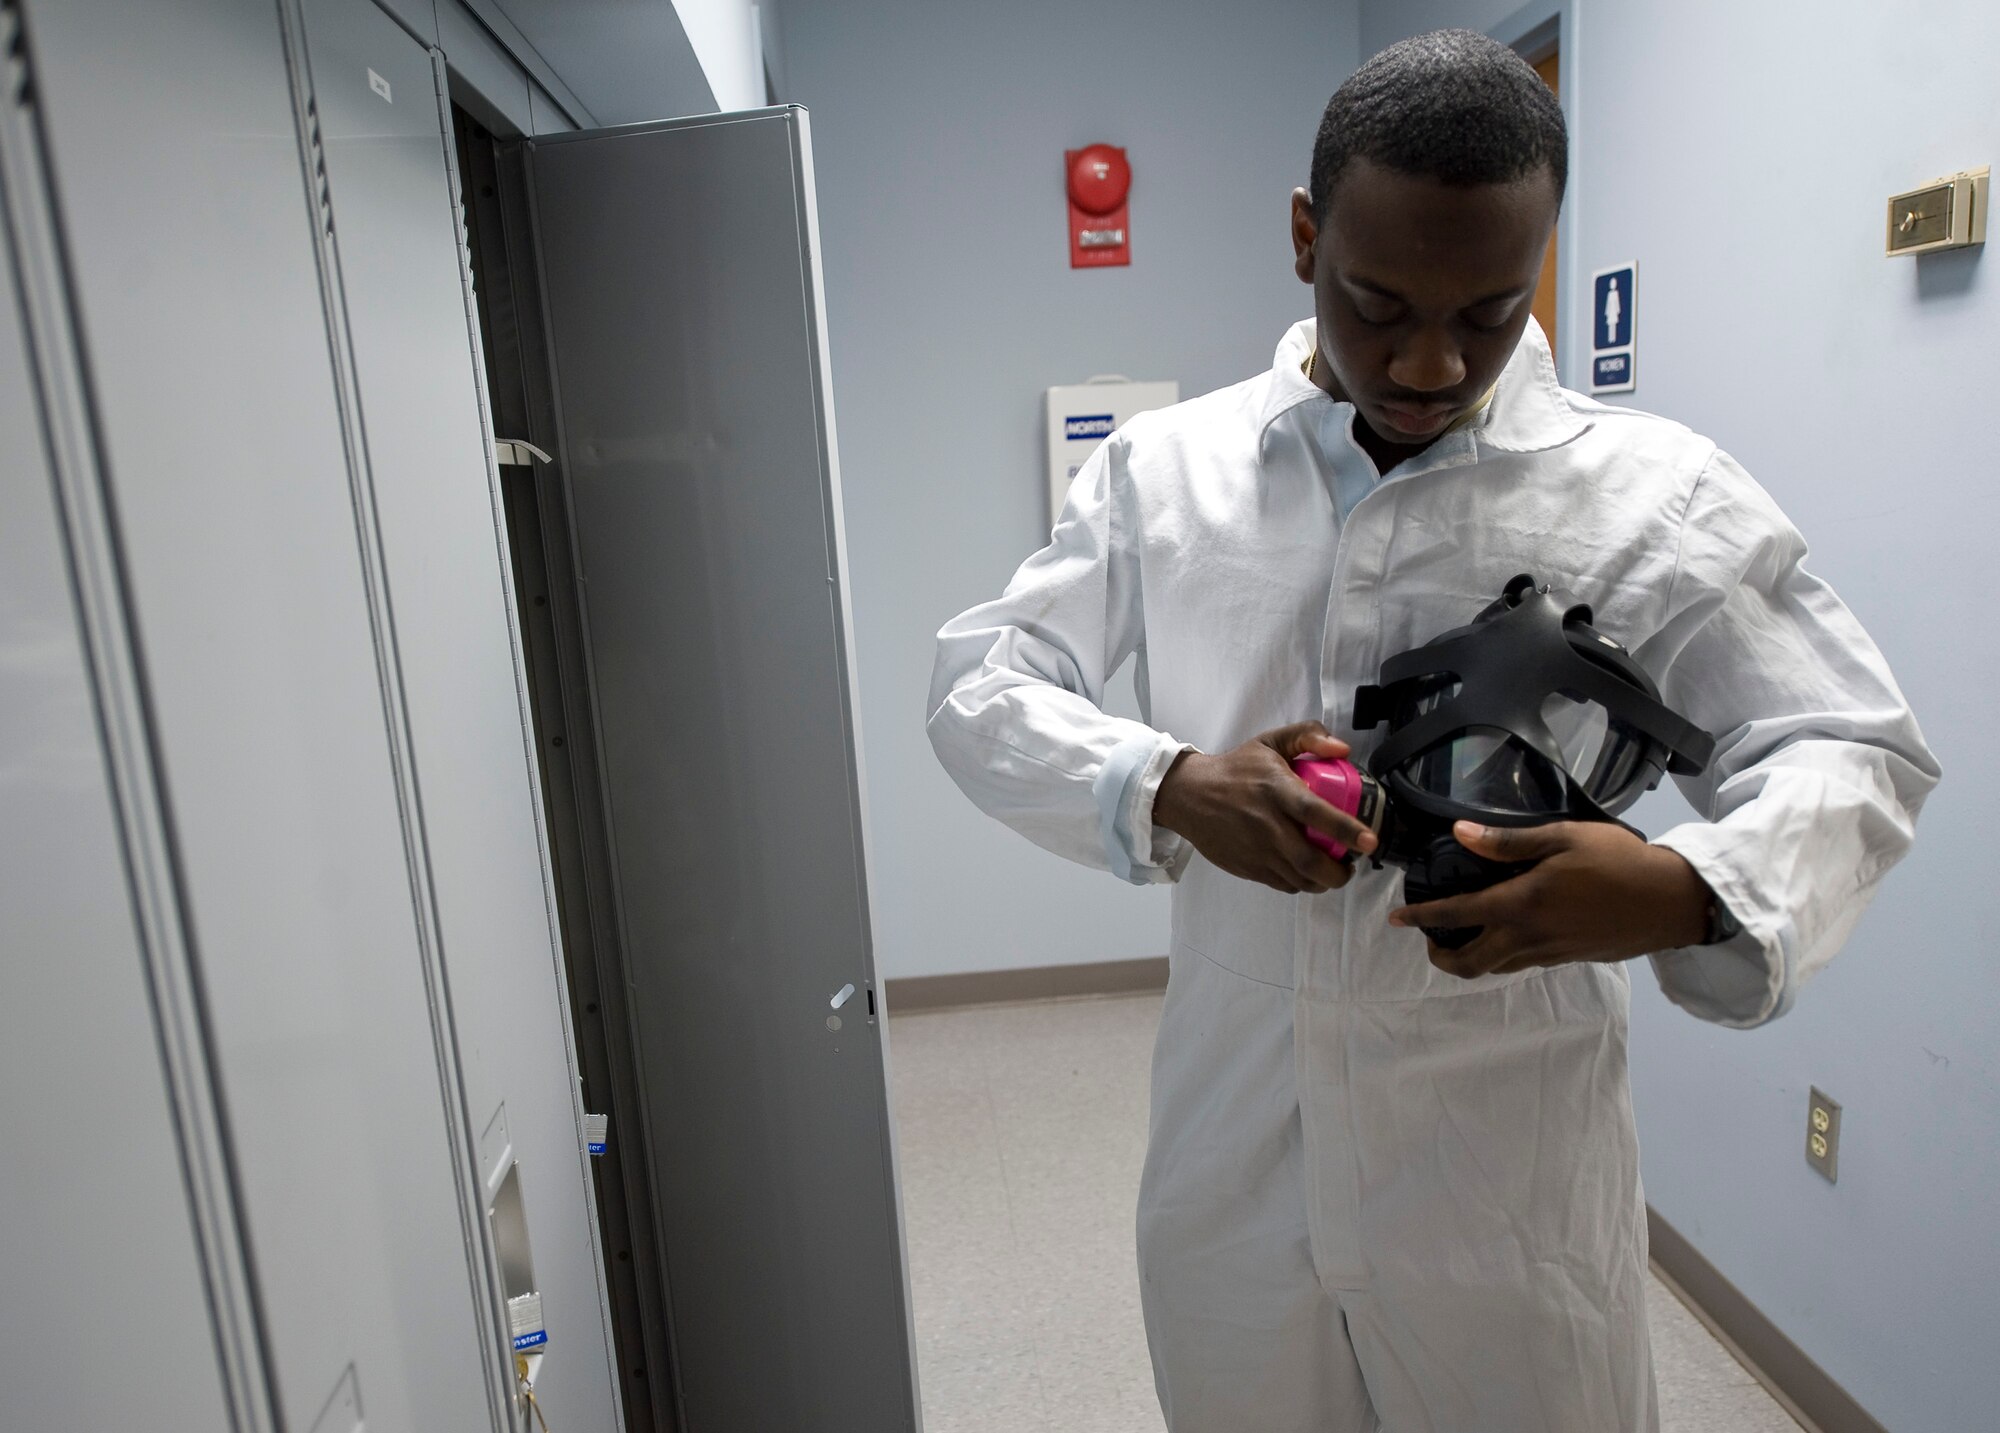 Senior Airman Thomas Davis, 2nd Civil Engineer Squadron Pest Management Flight, prepares his mask on Barksdale Air Force Base, La., Feb. 9. The mask is one piece of the protective equipment worn by Airmen when handling pesticides. (U.S. Air Force photo/Senior Airman Chad Warren)(RELEASED)